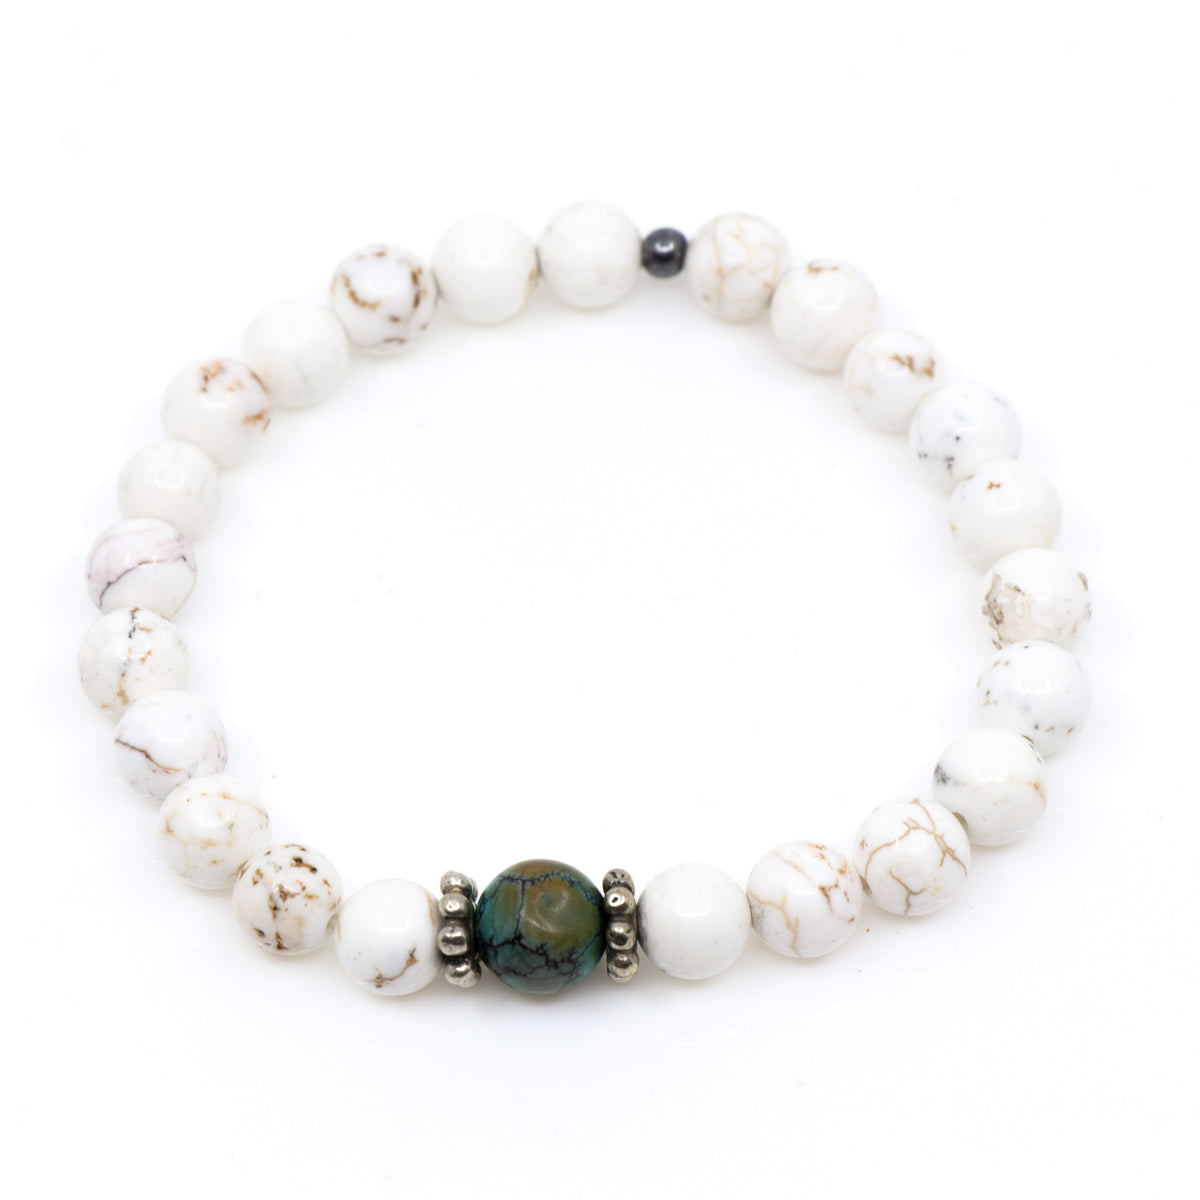 White Turquoise with Natural Turquoise Bead, Men's Bracelets